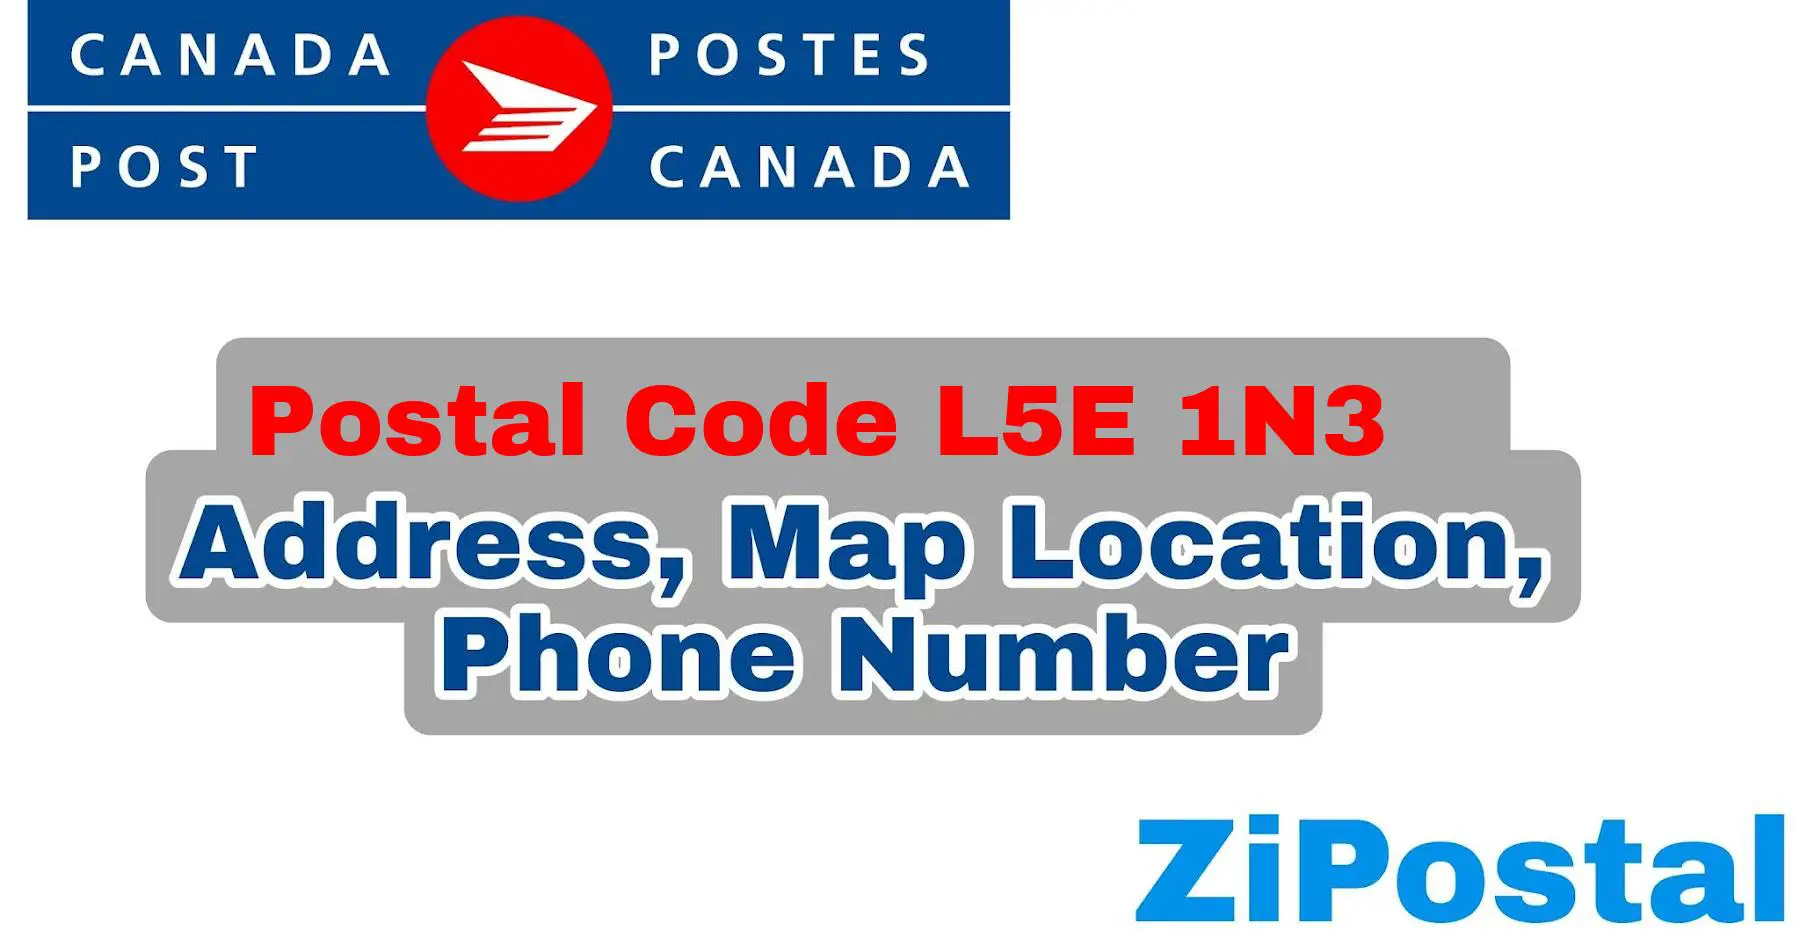 Postal Code L5E 1N3 Address Map Location and Phone Number